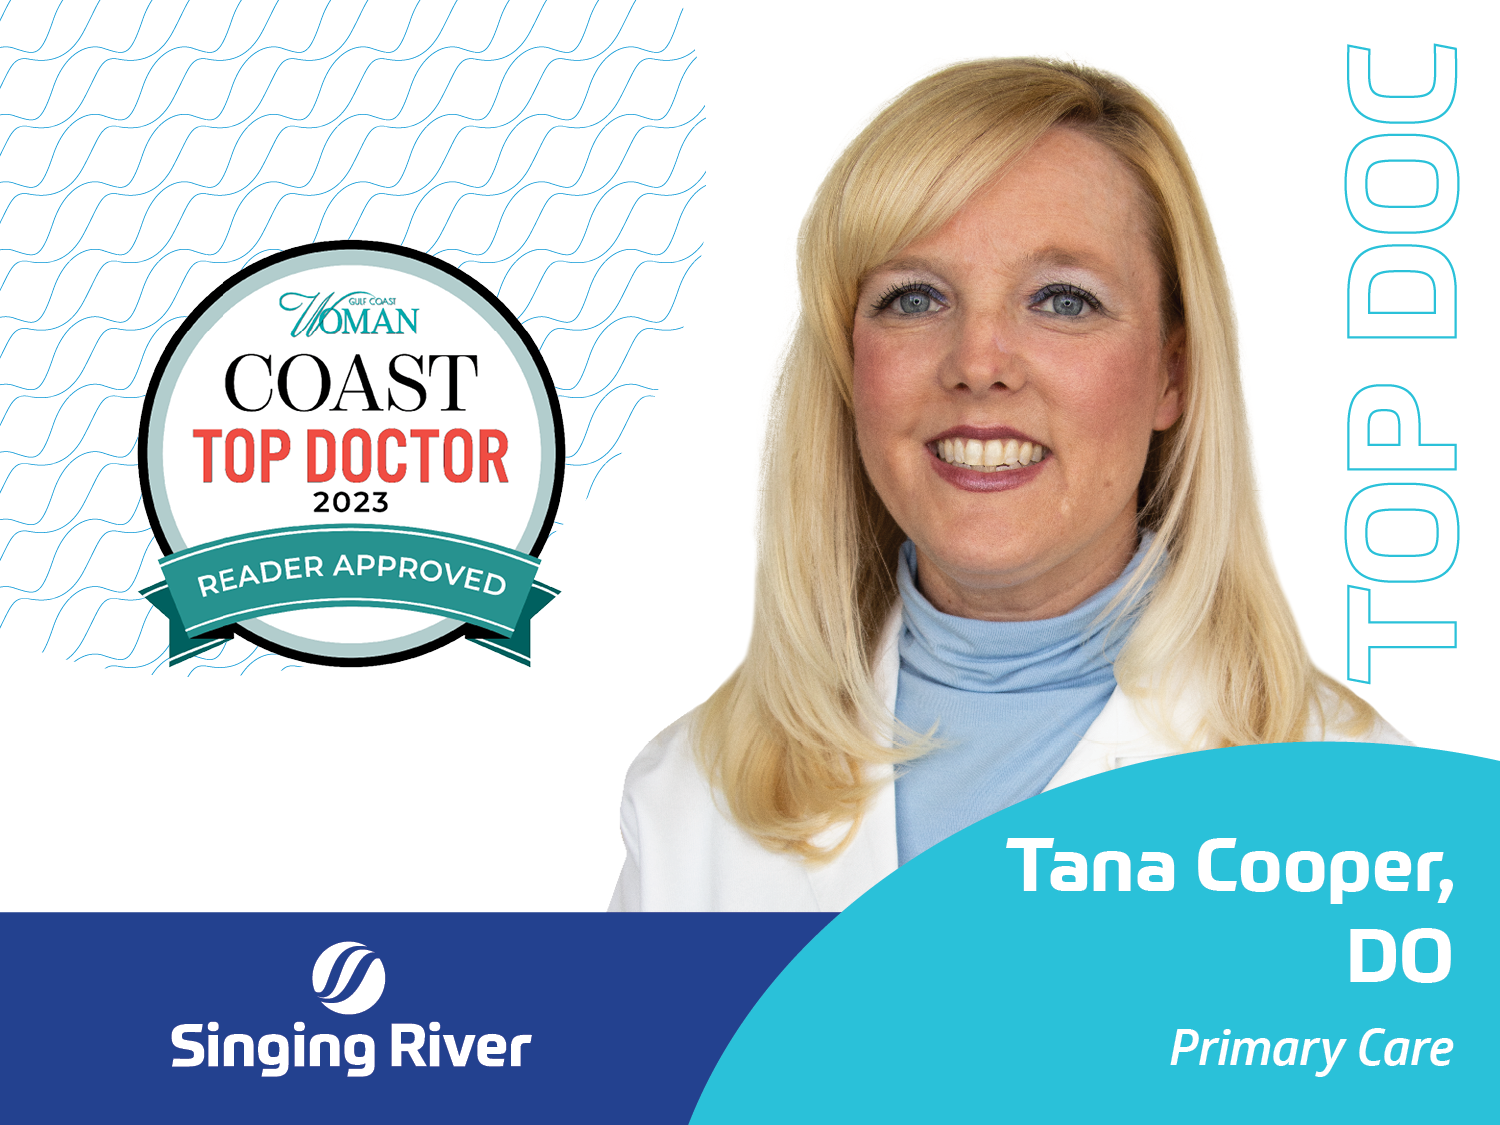 Gulf Coast Woman Top Doctor 2023, Reader Approved. Tana Cooper, DO, Primary Care